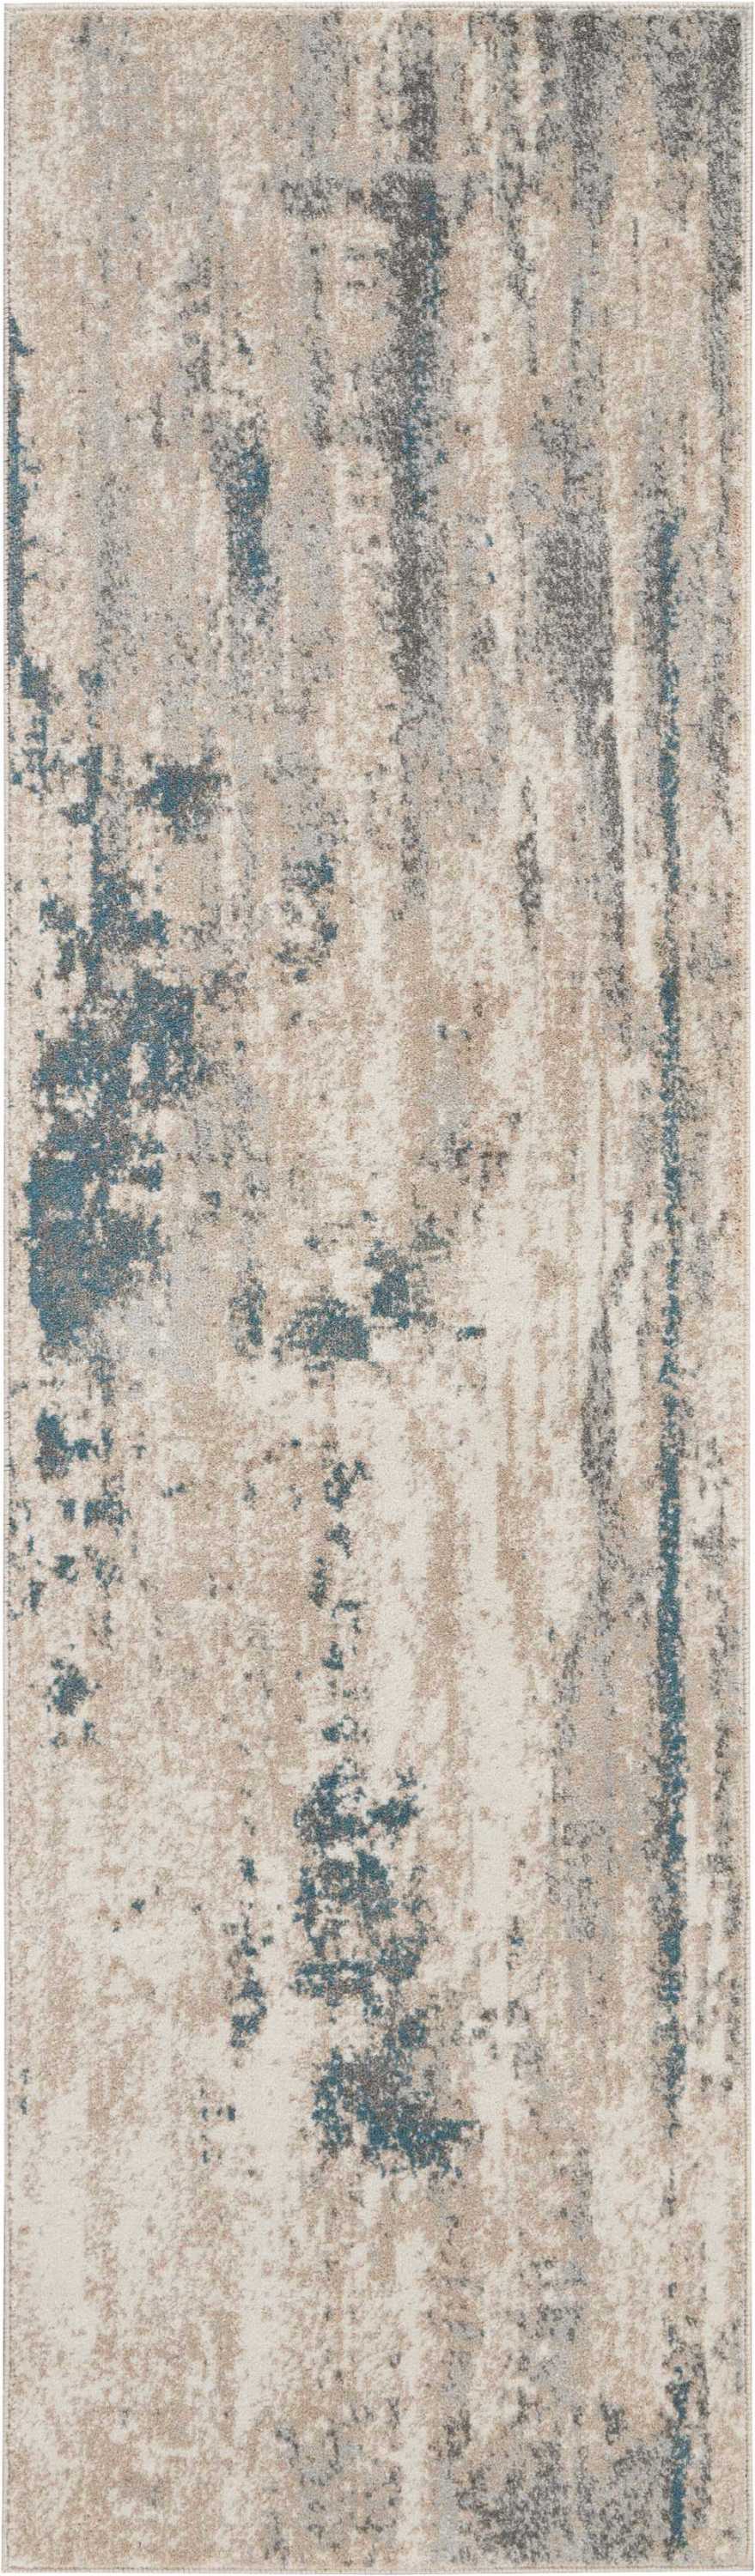 Nourison Maxell MAE17 Blue and White 8' Runner Hallway Rug MAE17 Ivory/Teal